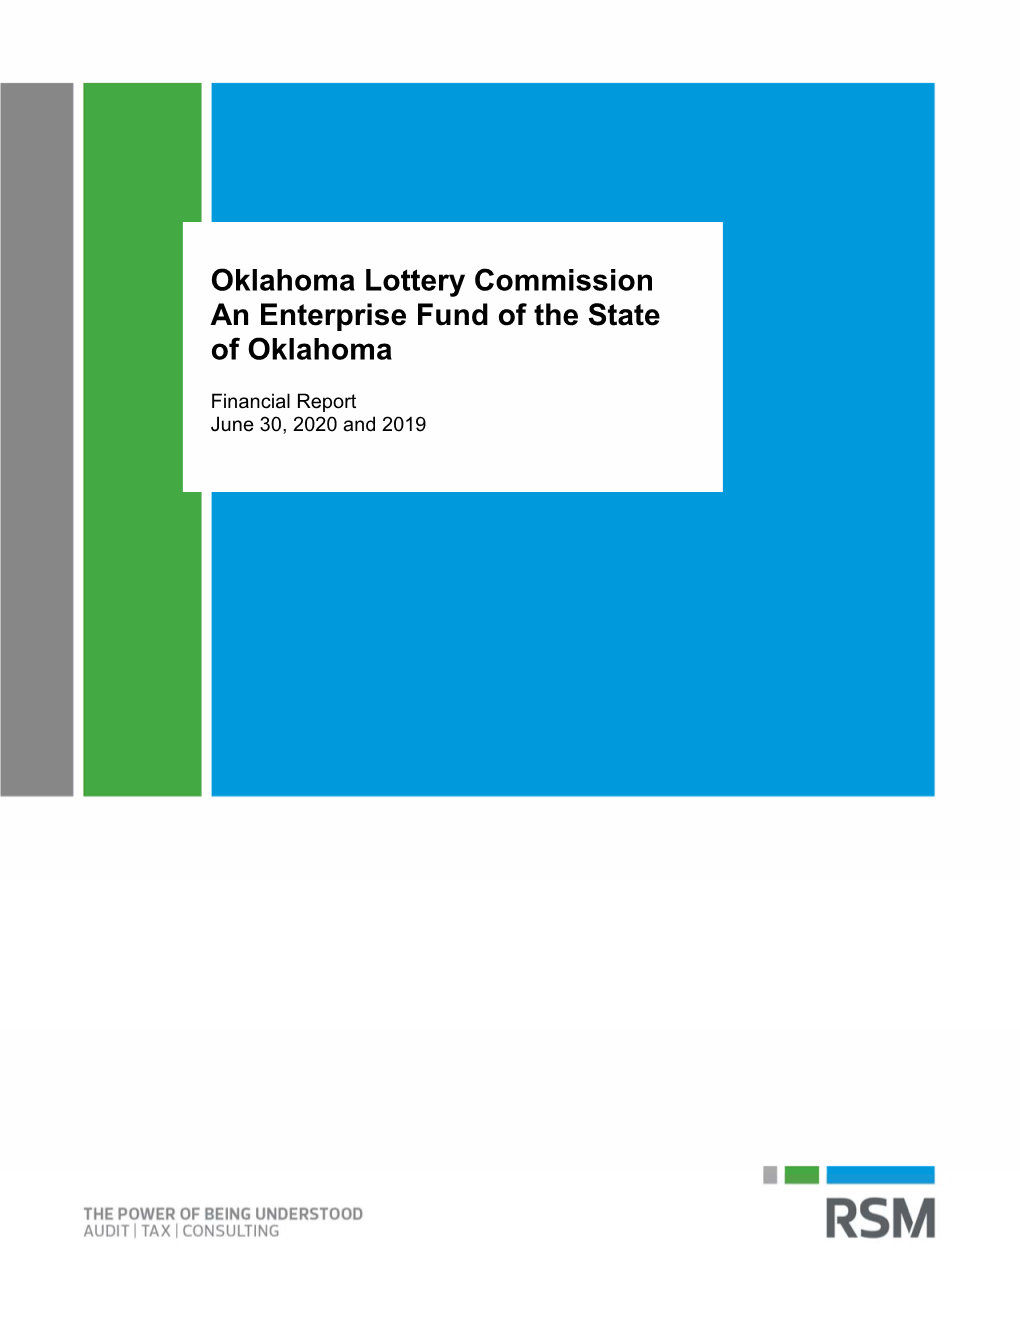 Oklahoma Lottery Commission an Enterprise Fund of the State of Oklahoma